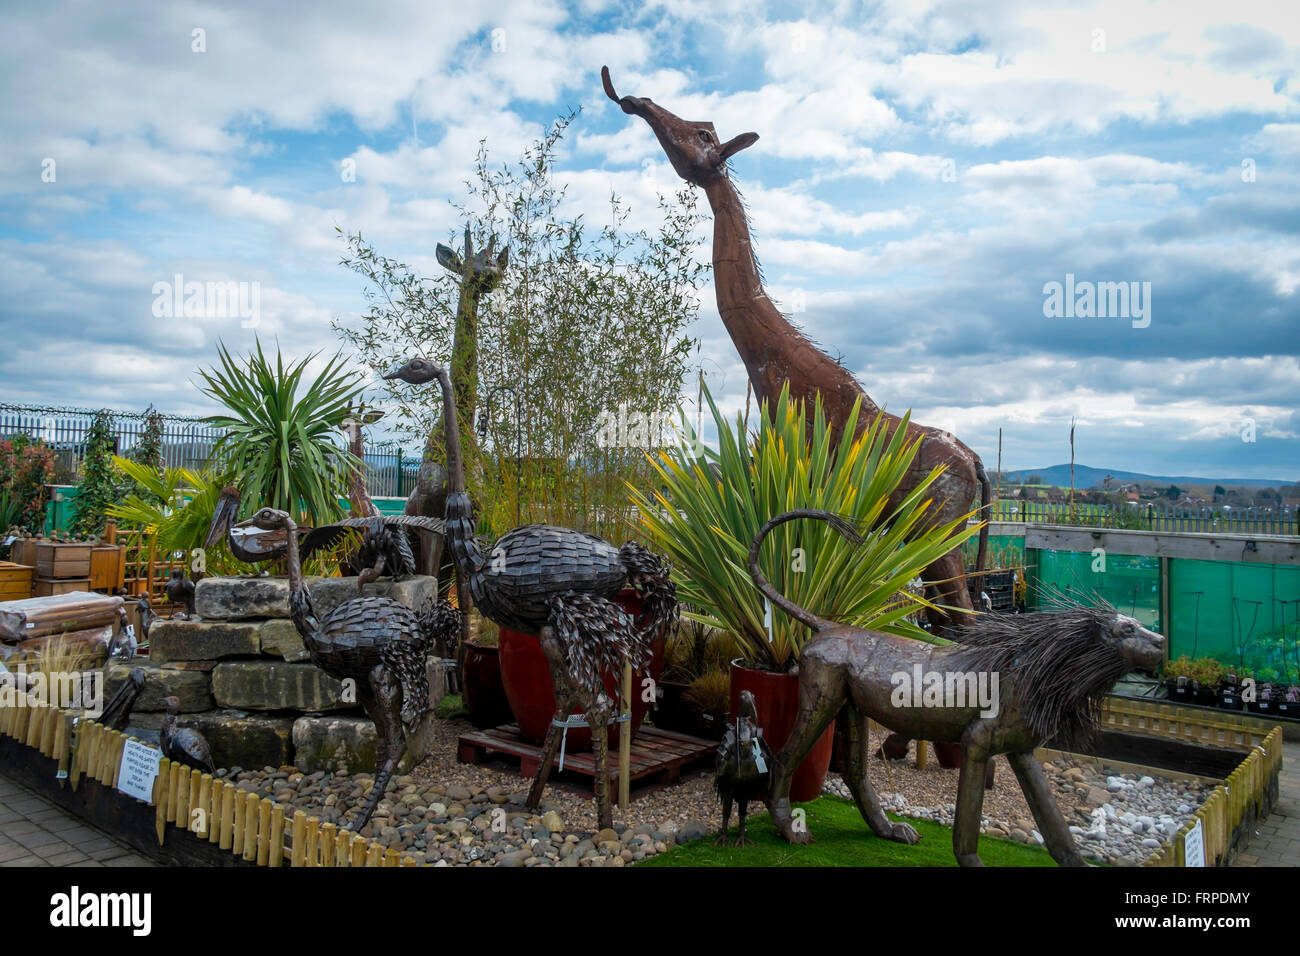 A collection of garden ornaments large steel giraffes lions and ostriches statues in a suburban garden centre Stock Photo